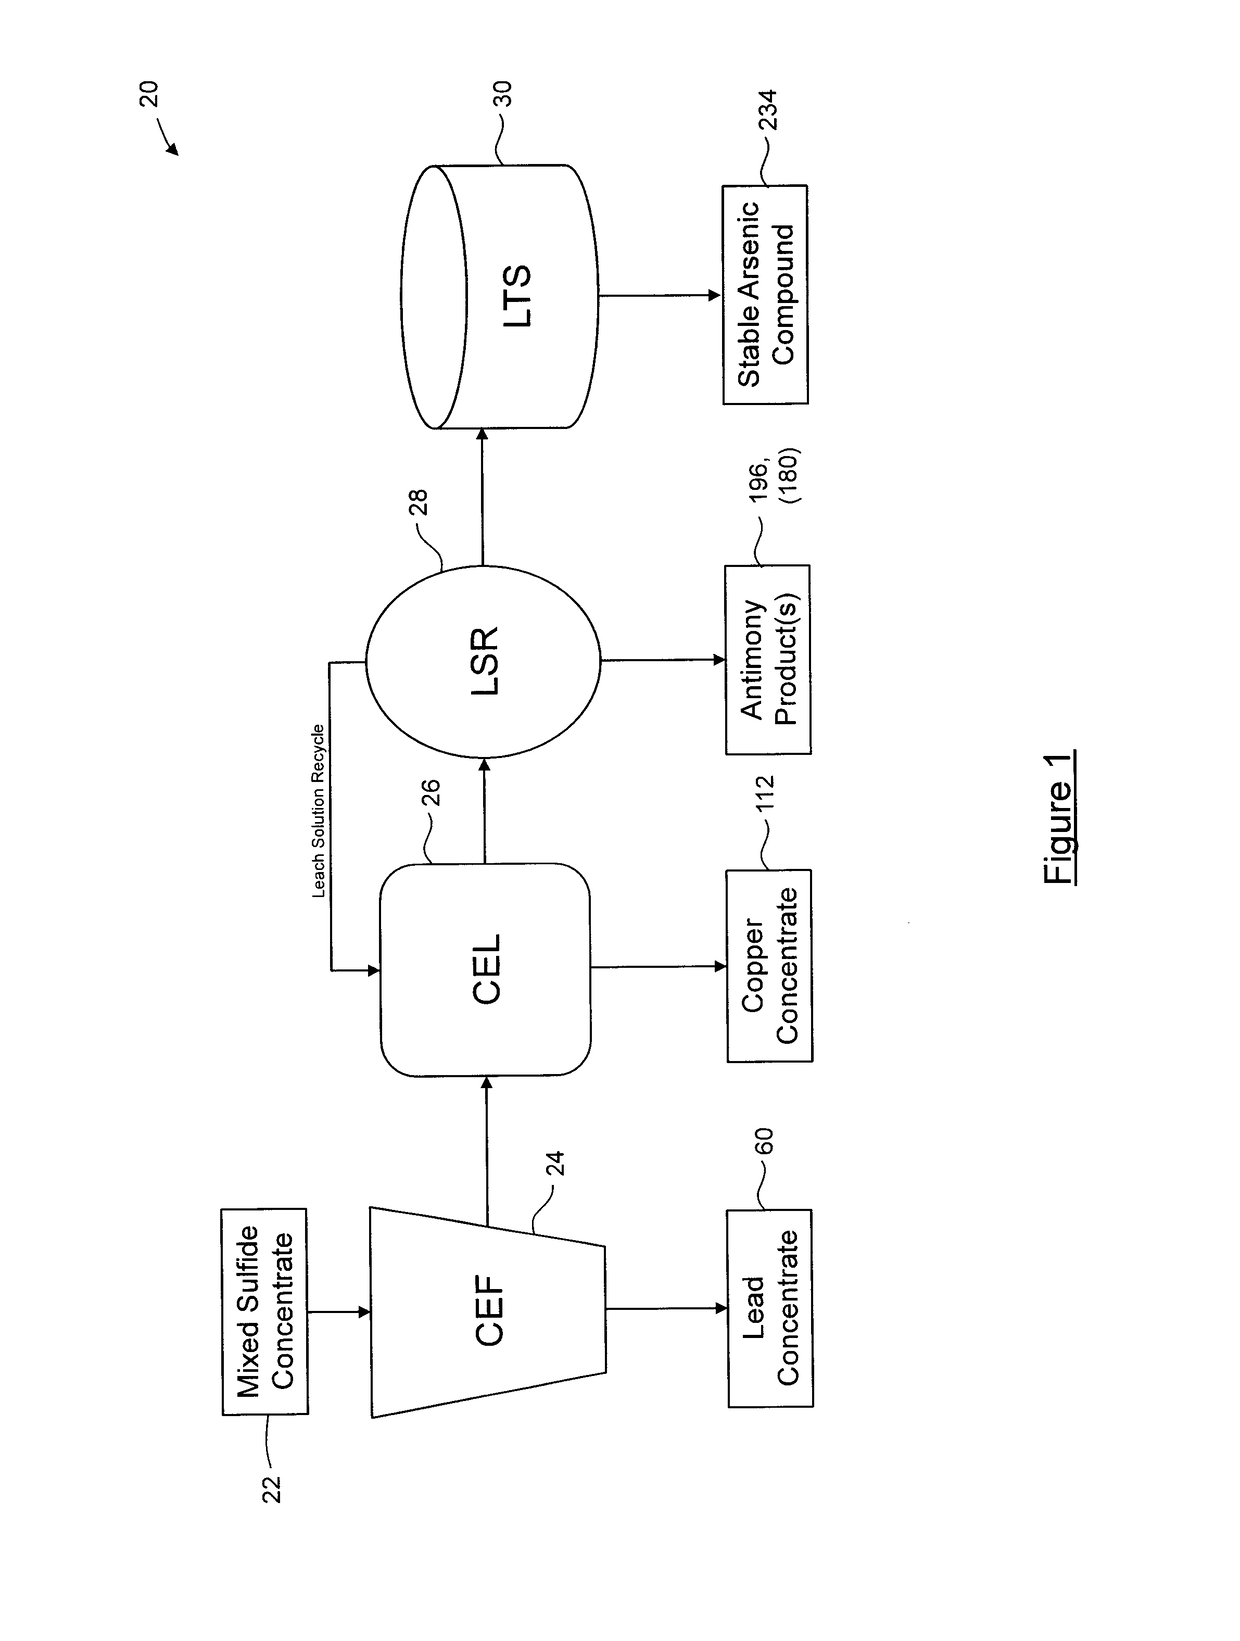 Process for separation of at least one metal sulfide from a mixed sulfide ore or concentrate